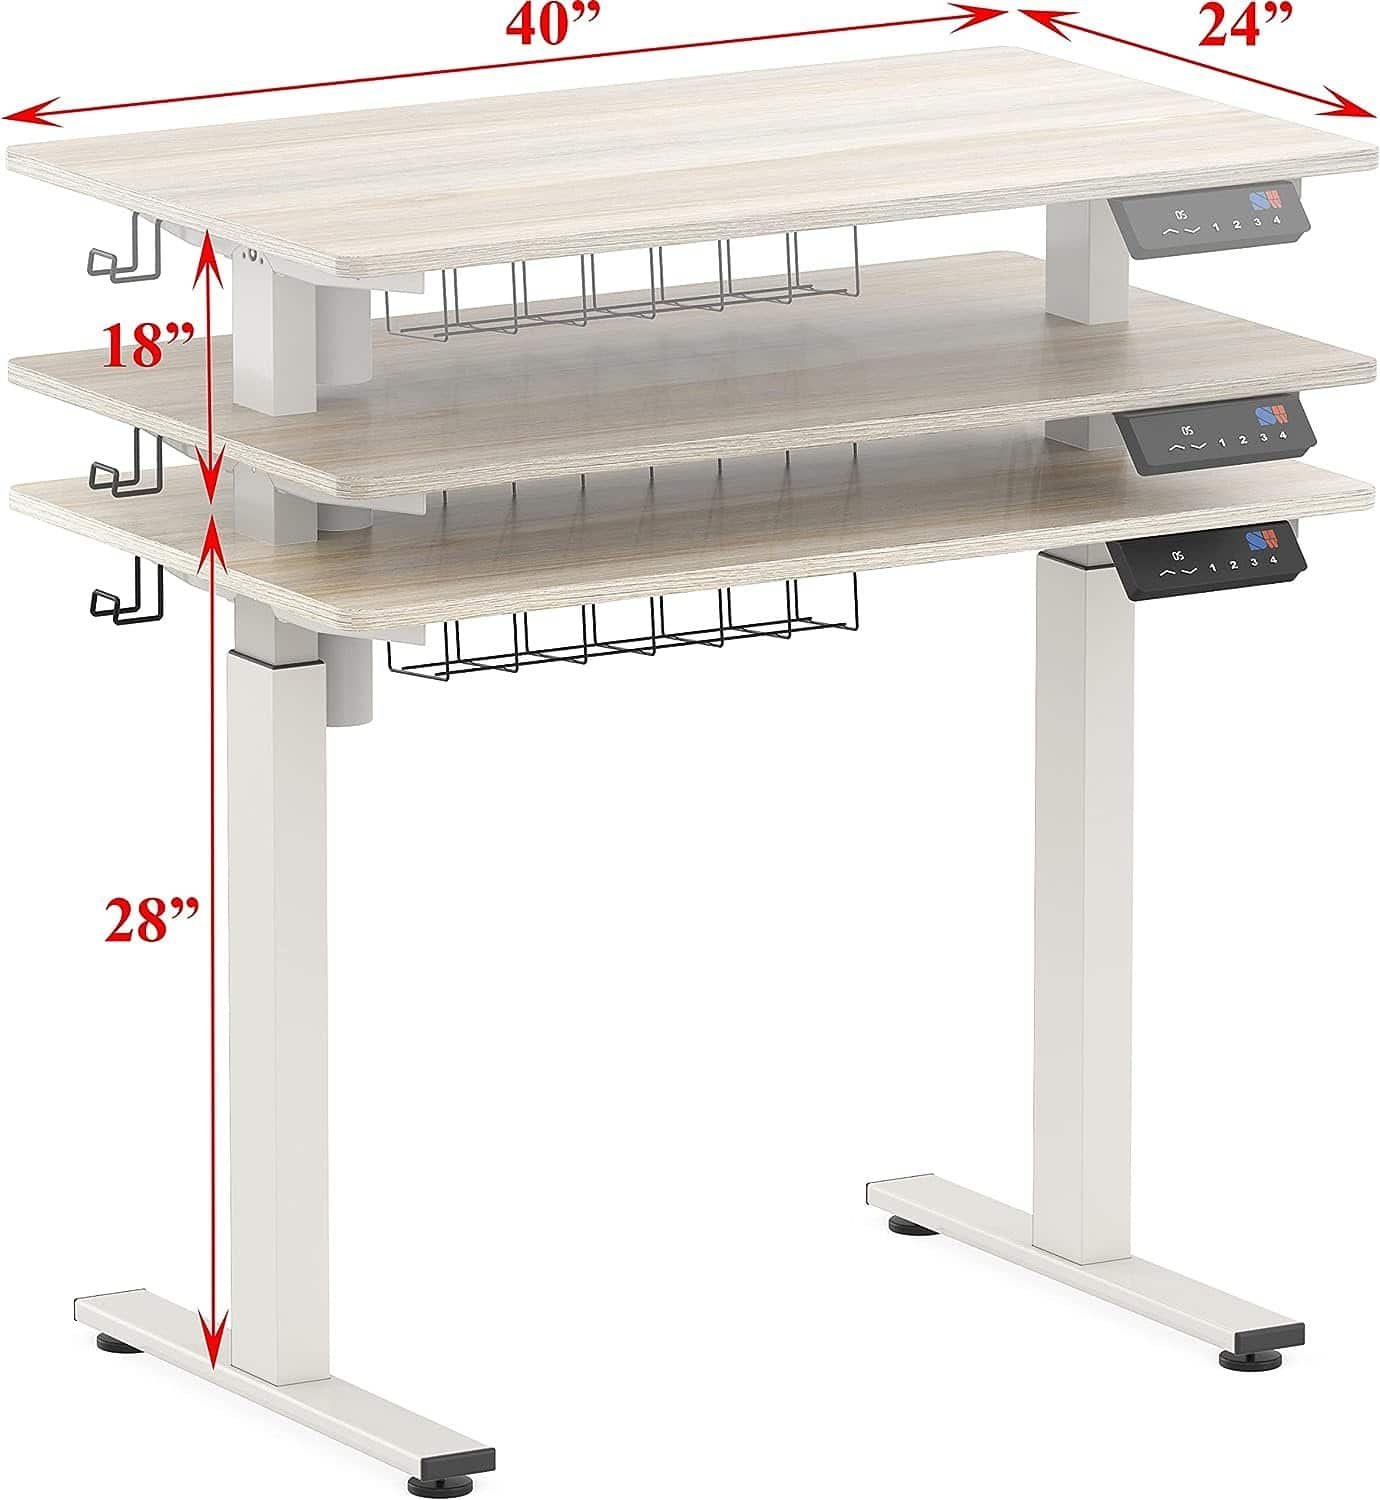 SHW Height Adjustable Desk Review